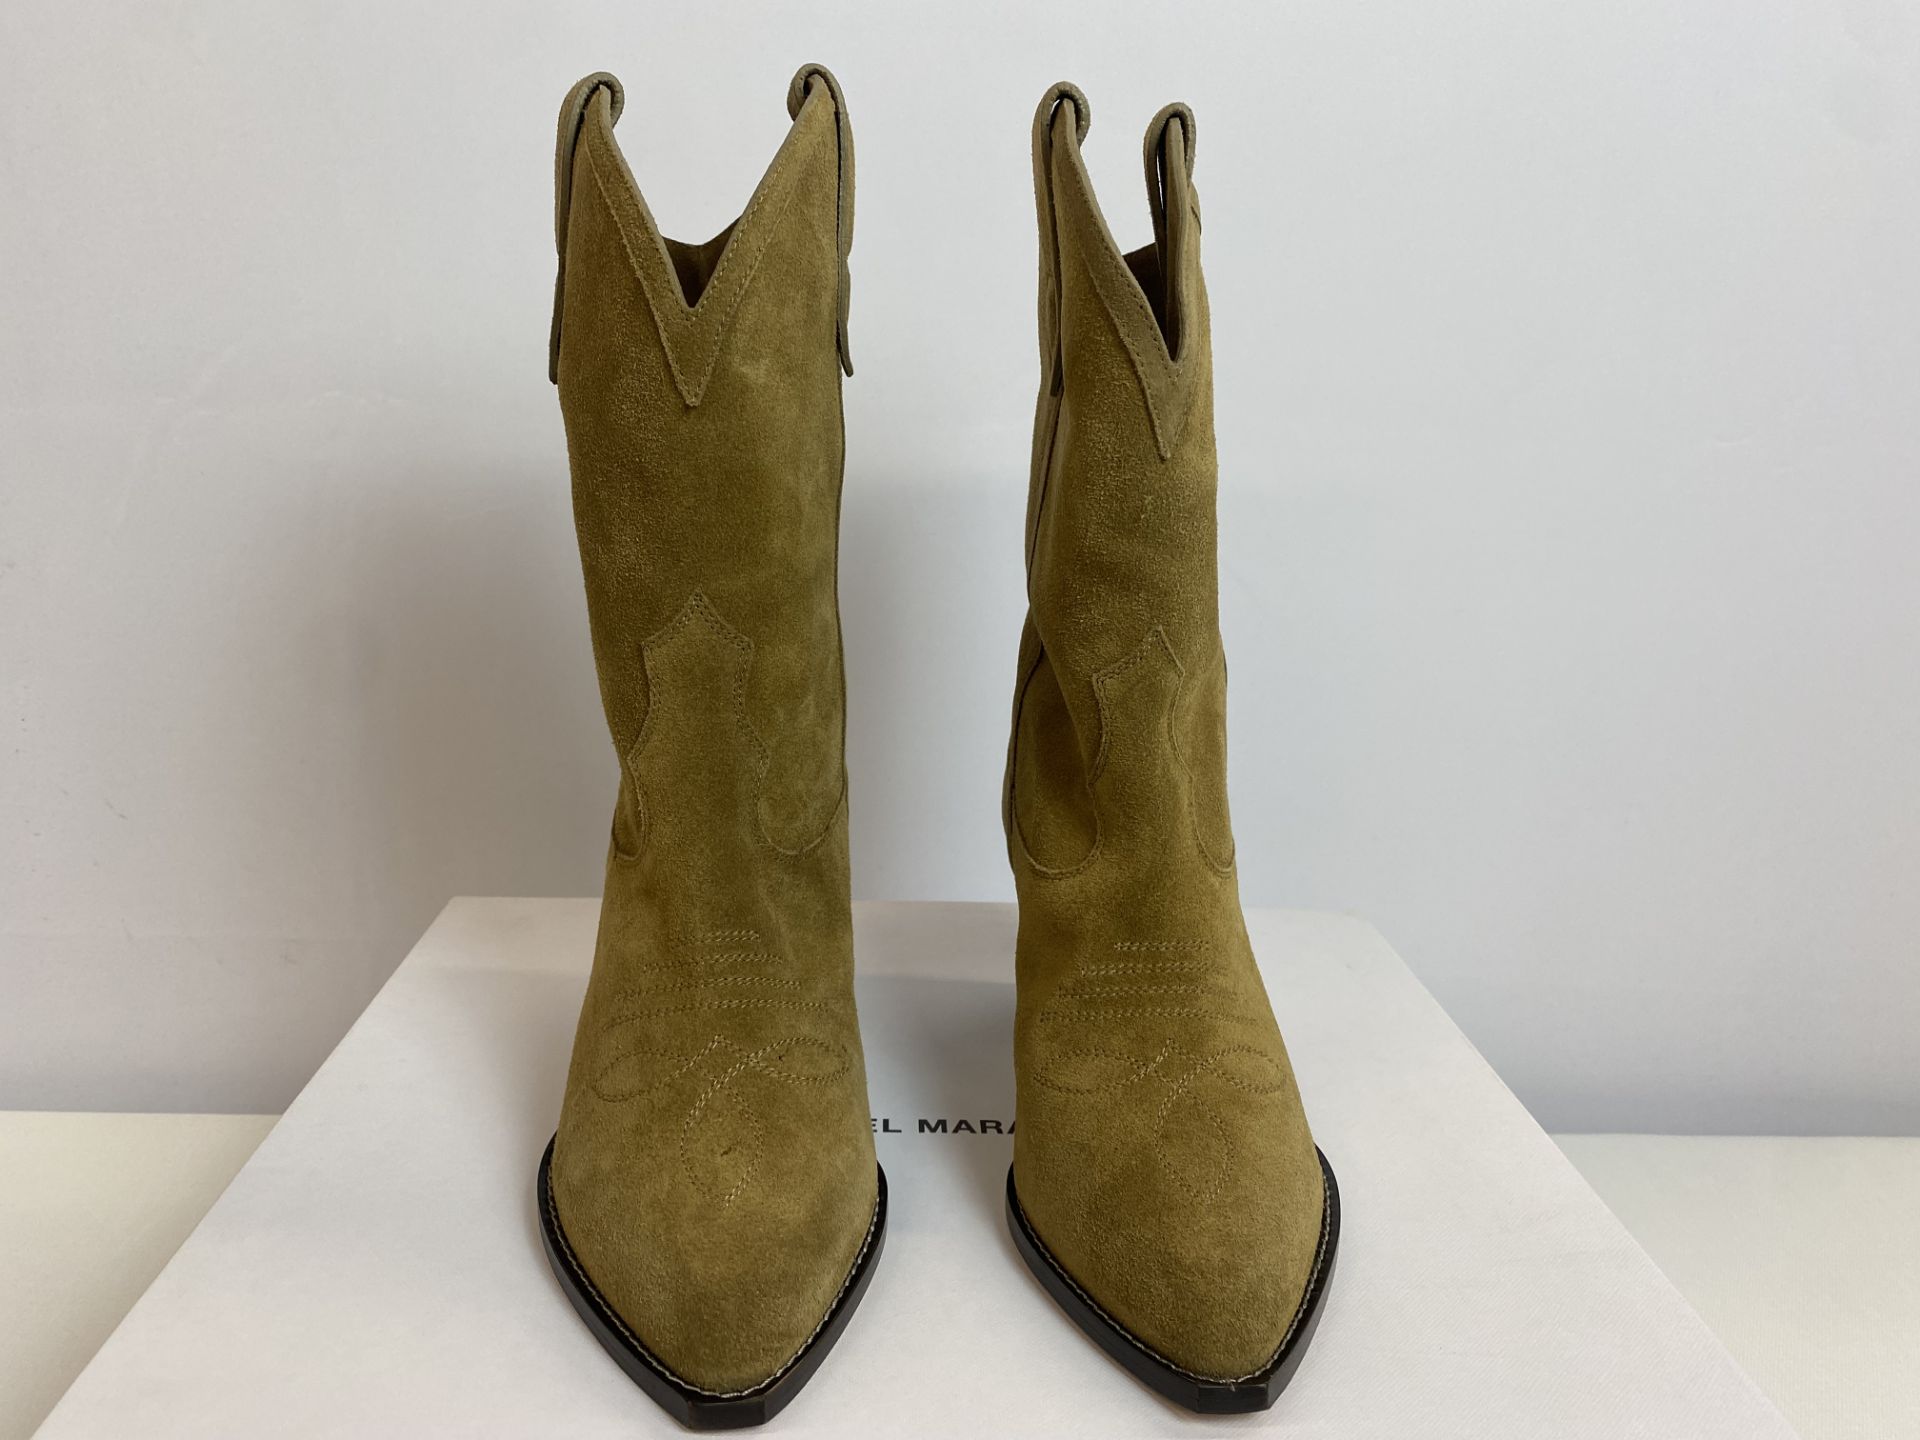 Isabel Marant Boot Luliette Suede Boot Feminine Size: 37 Taupe, Retail Price: $1250 - Image 3 of 4